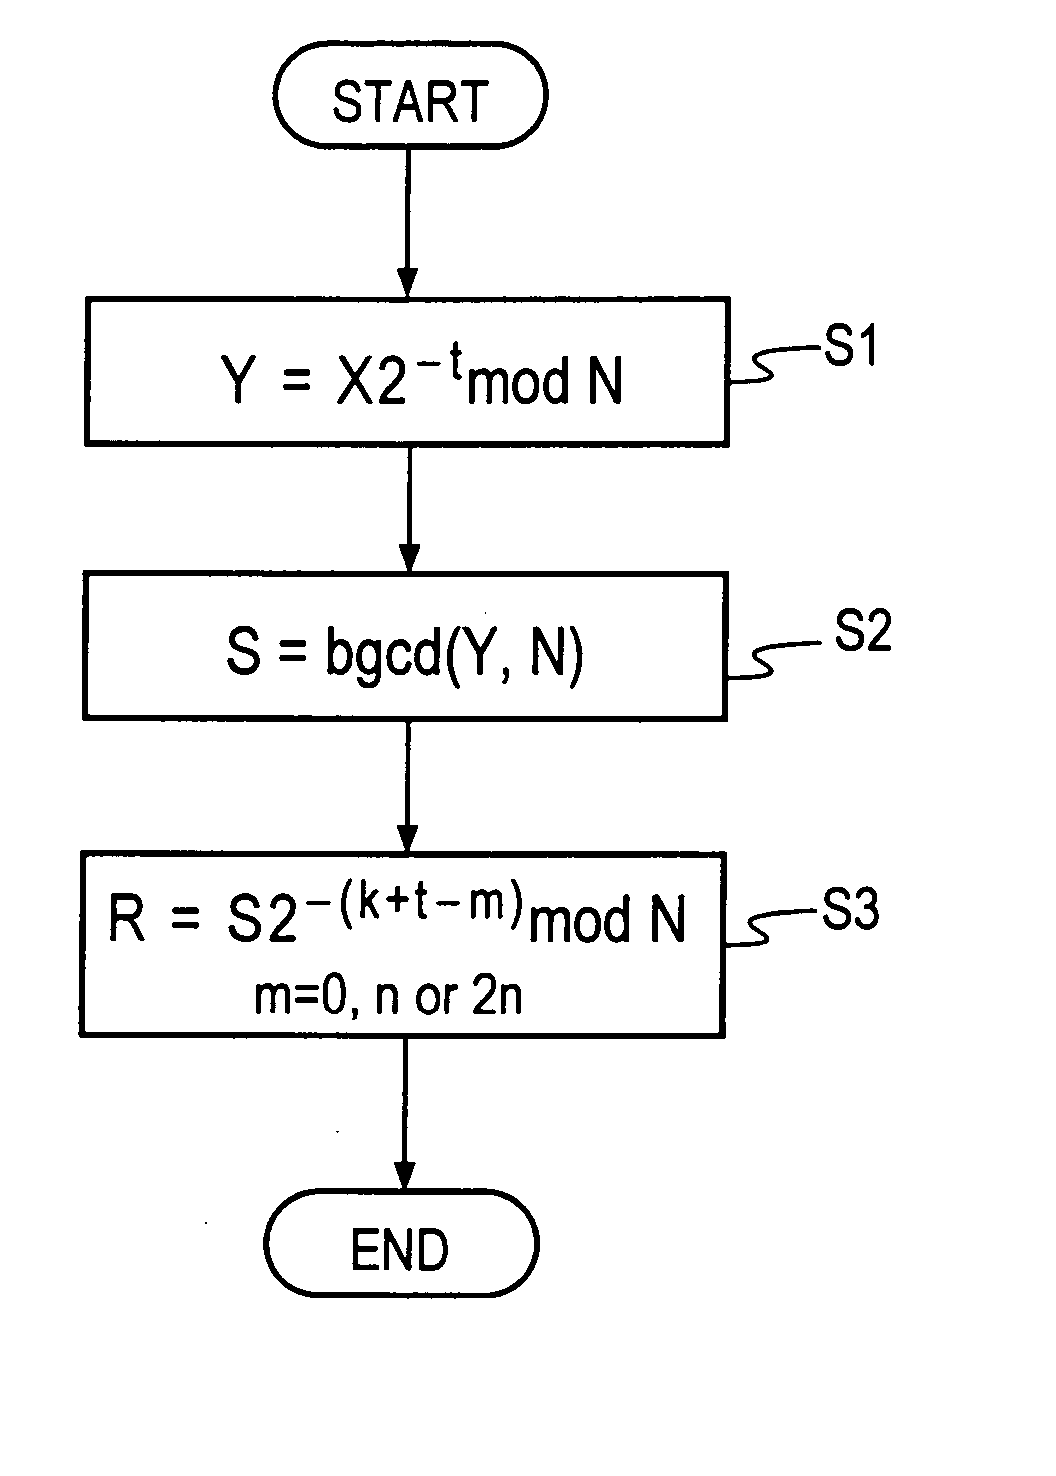 Method and apparatus for modular inversion for information security and recording medium with a program for implementing the method